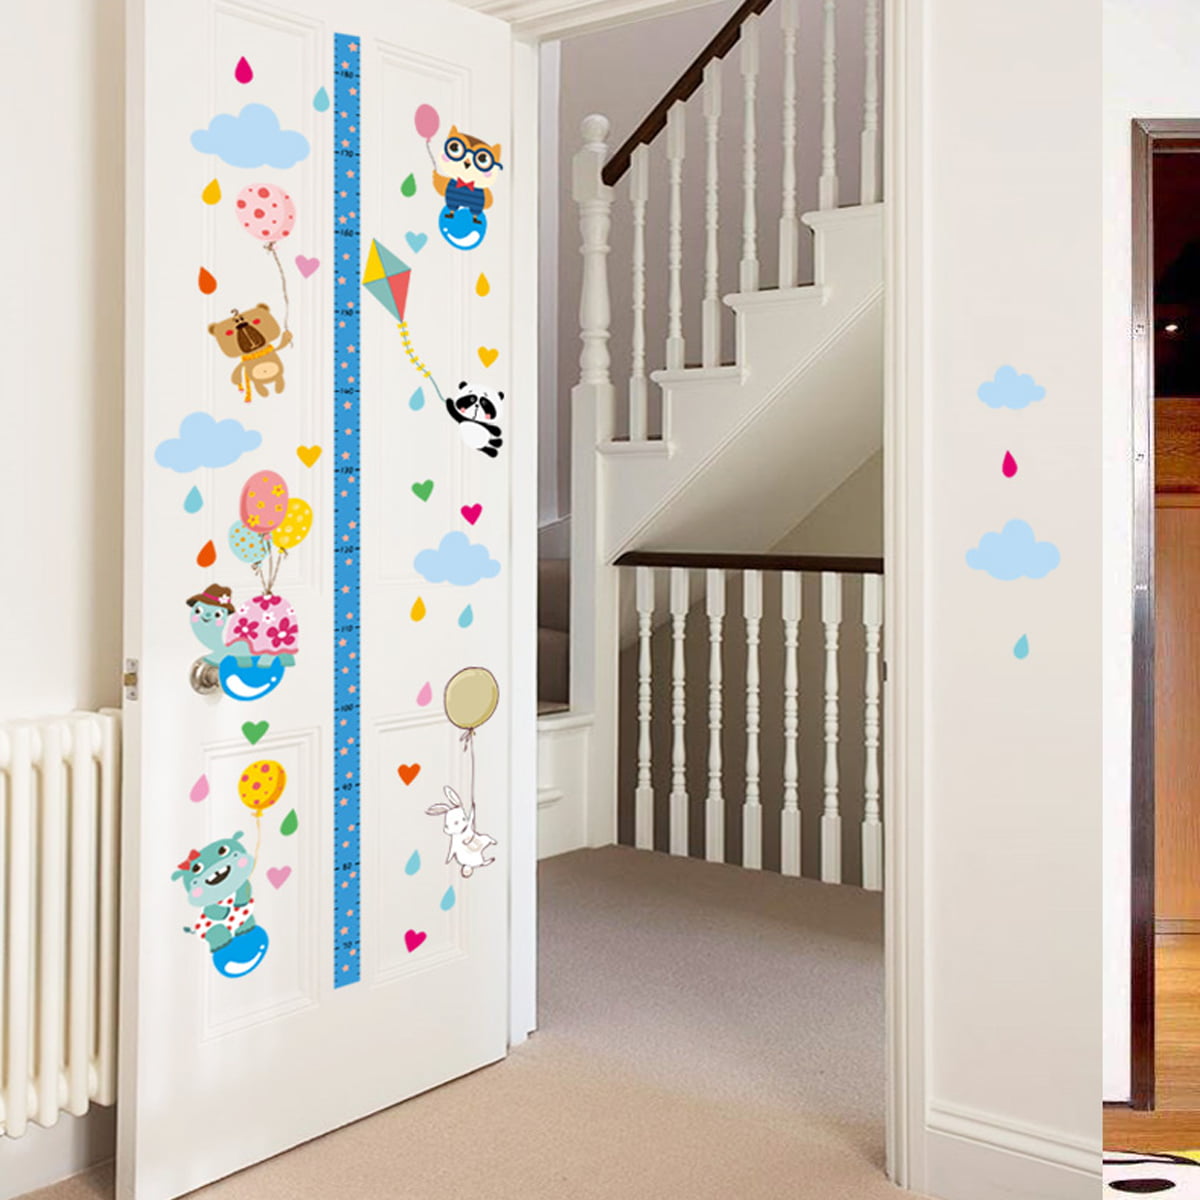 Wall Sticker For Kids Room Ruler Design Height Measure Growth Chart Poster Decor 